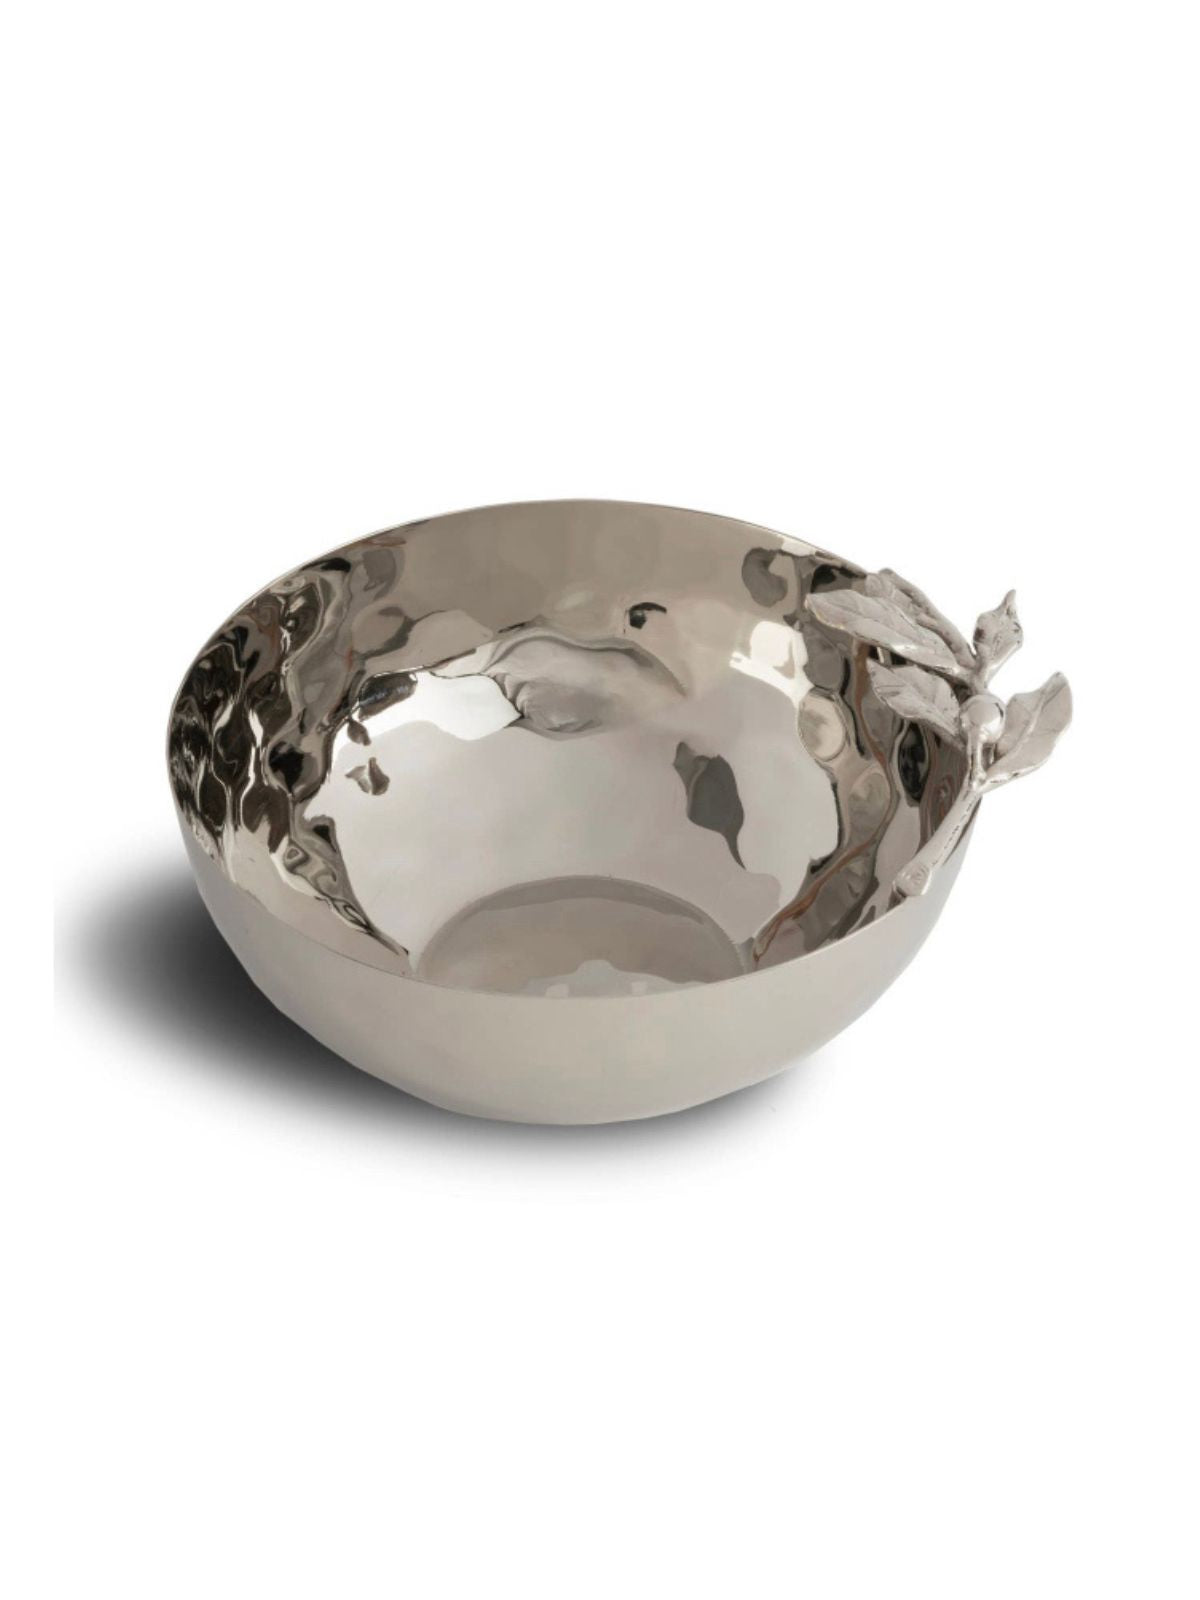 This stunning 8in stainless steel bowl is designed to be both beautiful and functional. The beautiful olive branch and olive motif accents along with the hammered stainless steel gives this bowl a striking finish. Sold by KYA Home Decor